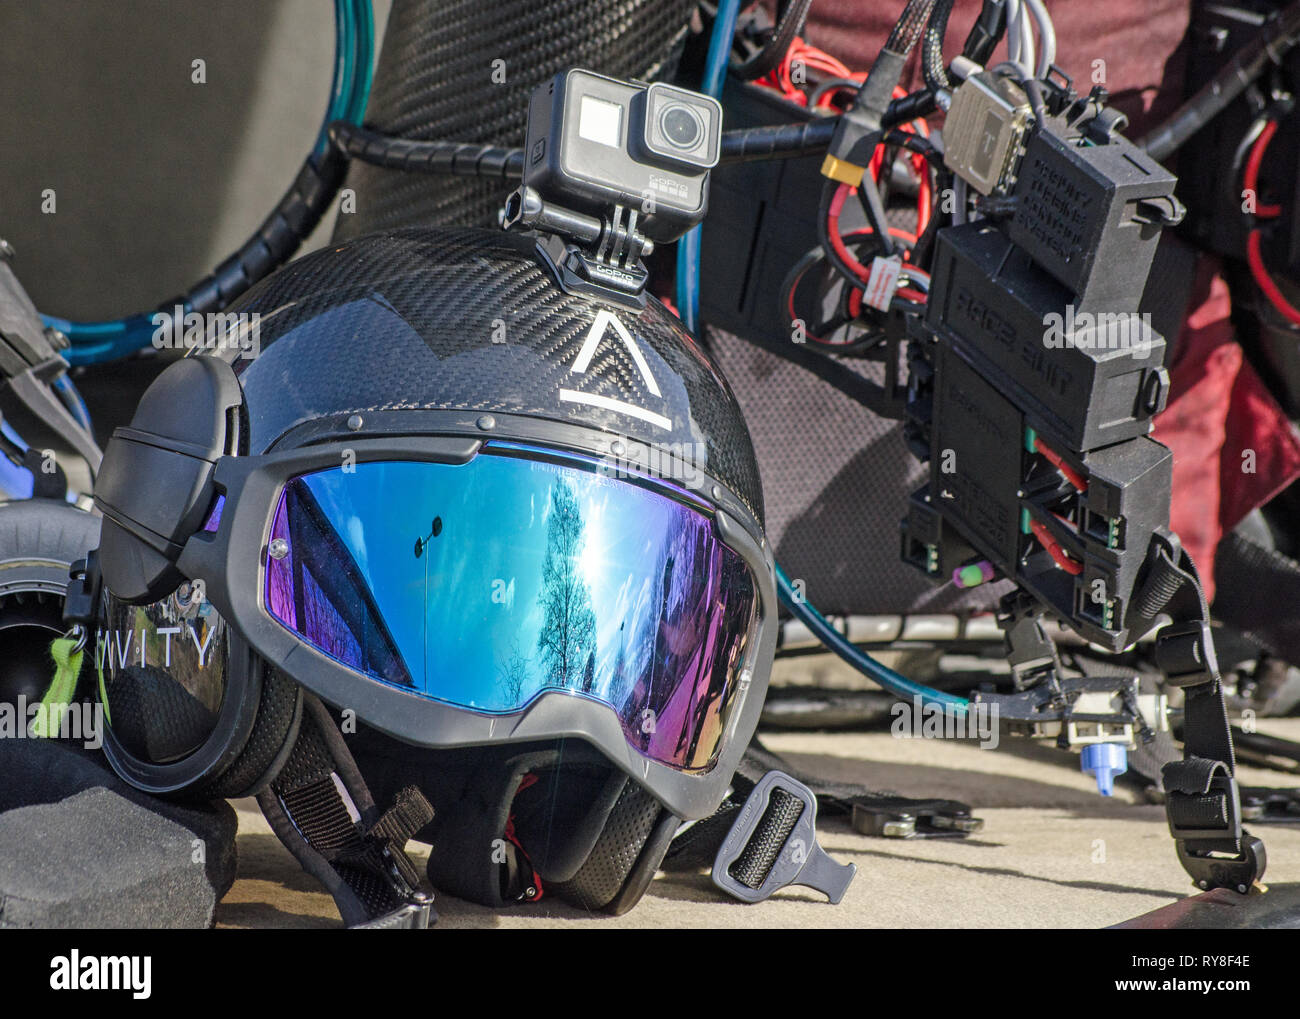 BASINGSTOKE, UK - MARCH 11, 2019: Specialist helmet branded for Gravity Industries to be worn by a pilot to use with an individual jet pack which will Stock Photo